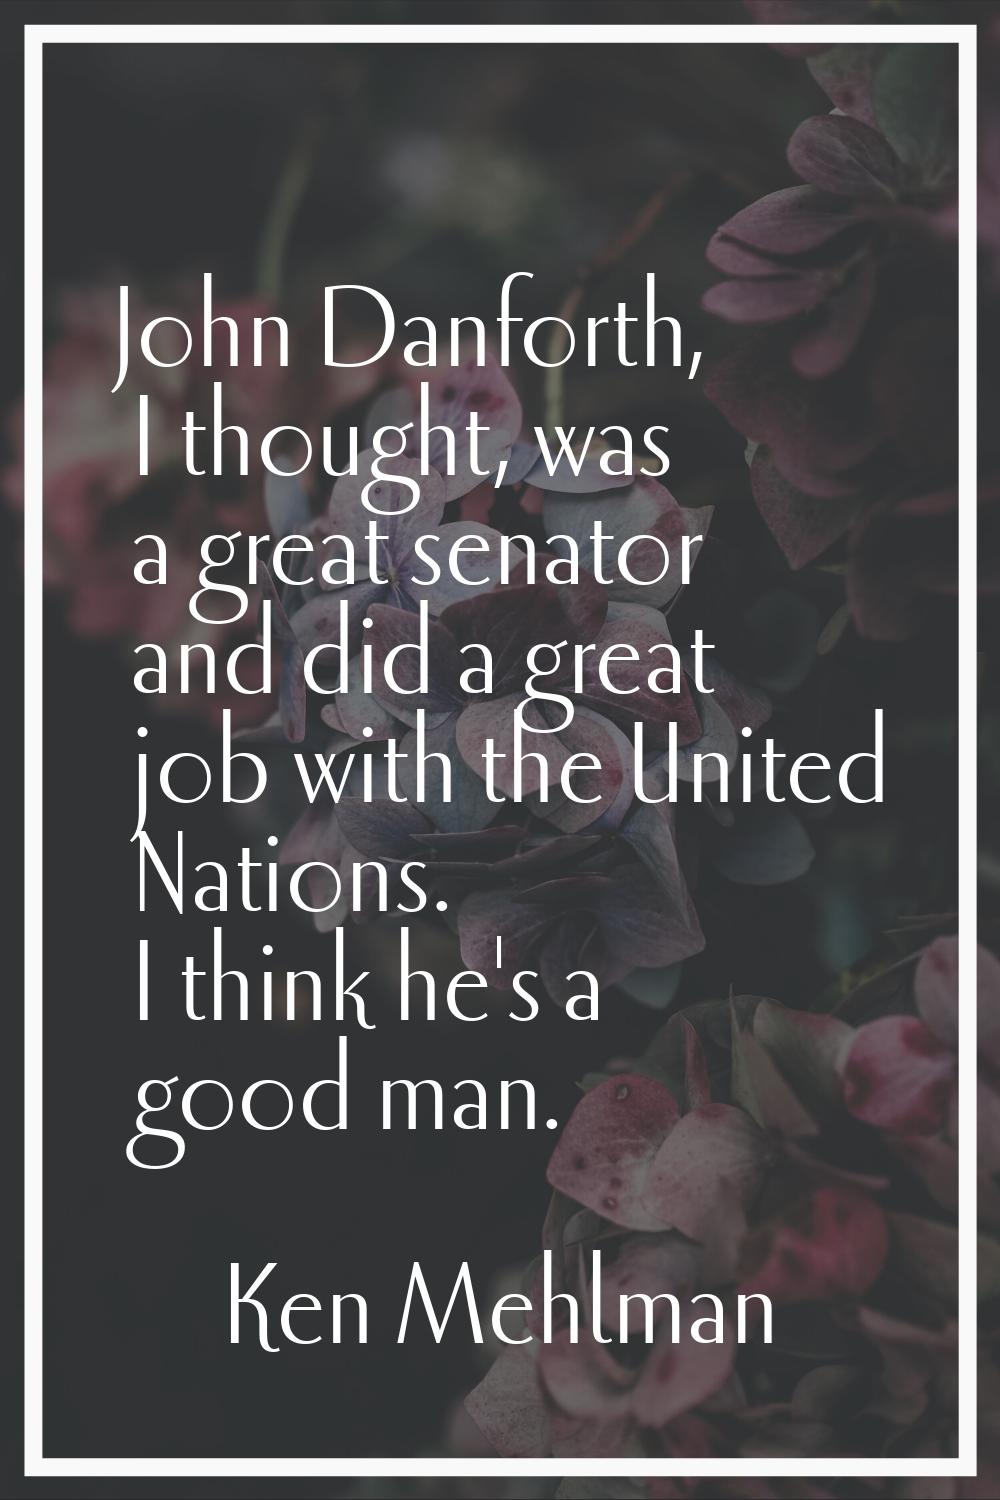 John Danforth, I thought, was a great senator and did a great job with the United Nations. I think 